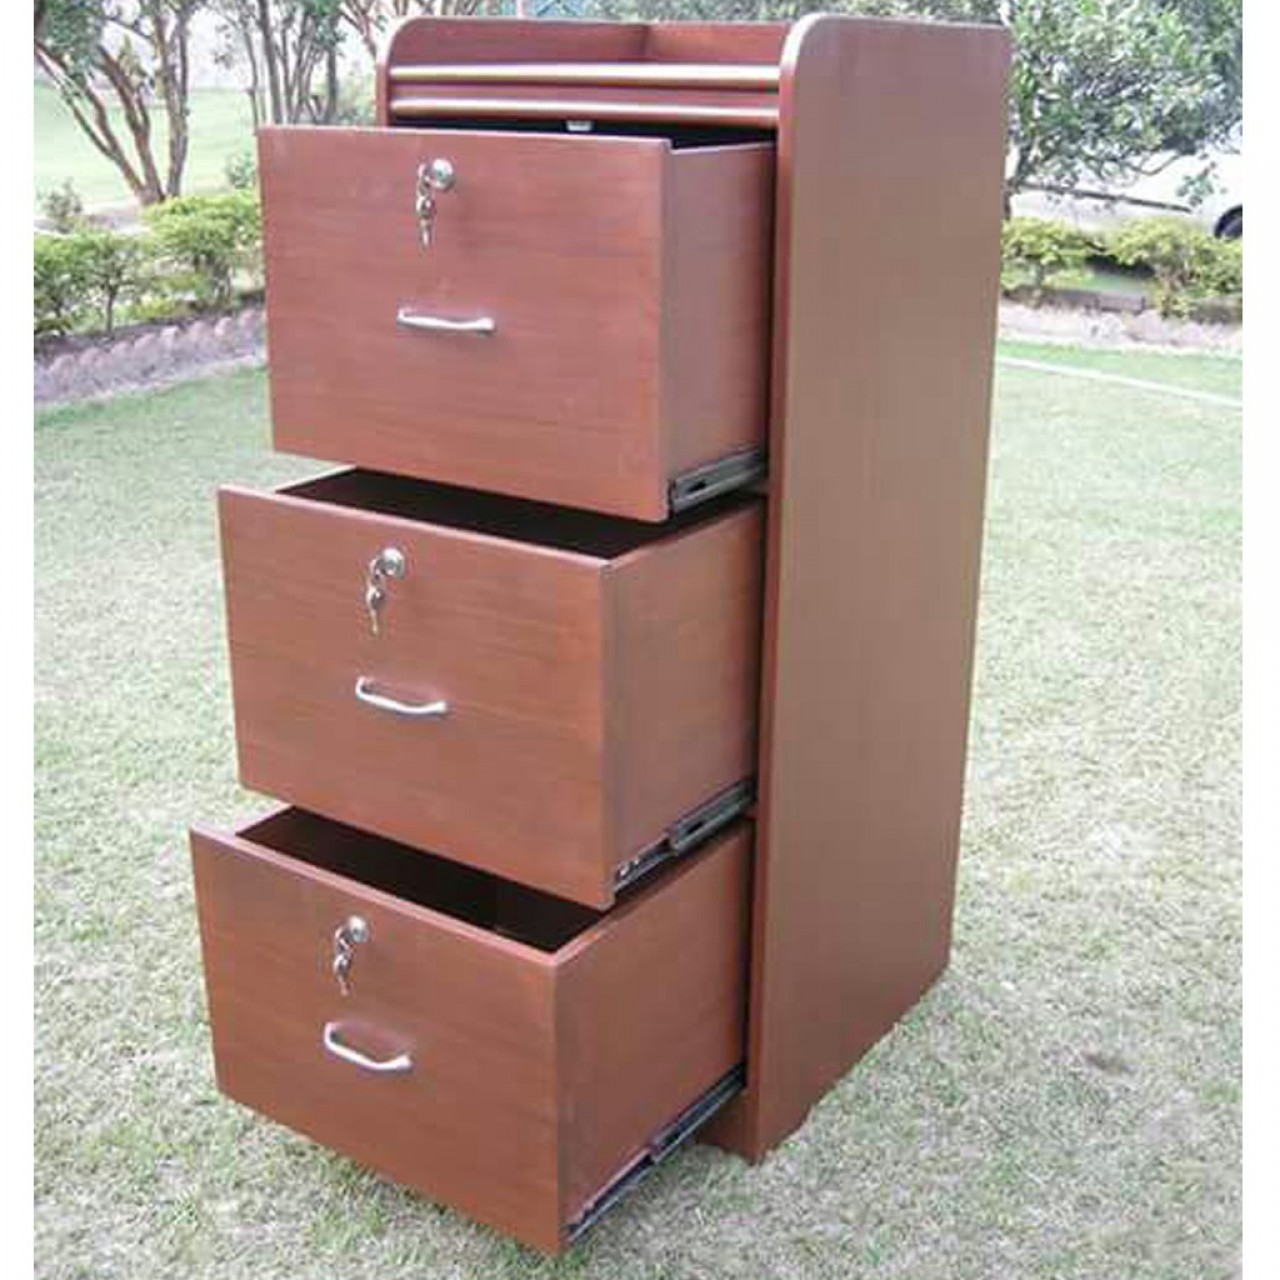 Premium Quality Vertical File Cabinet - 3 Drawers